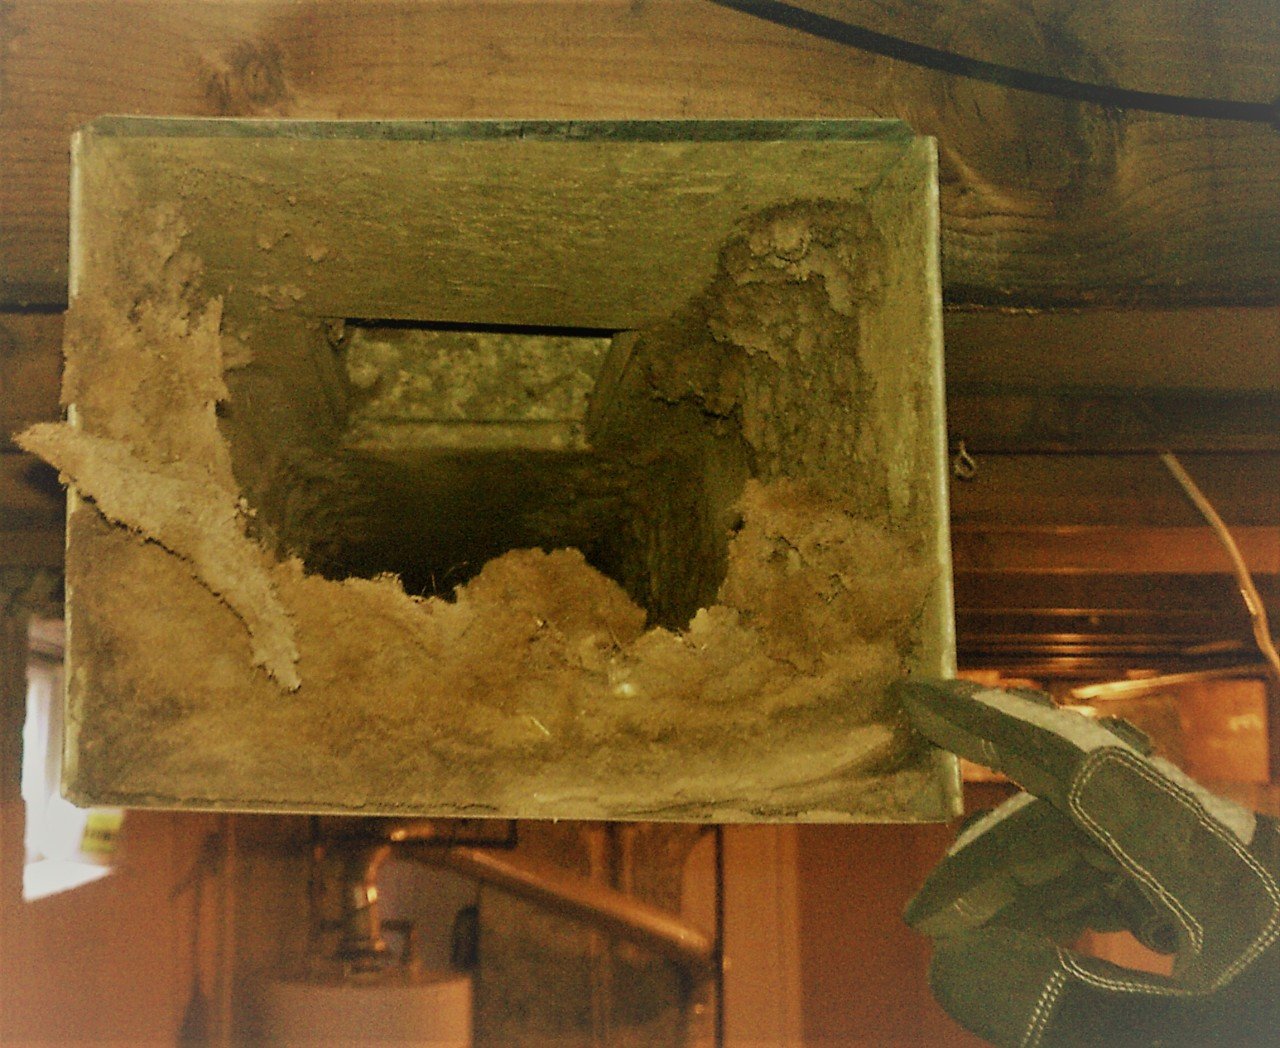 air+duct+cleaning+top+notch+restoration+before+ductwork+thick+contamination